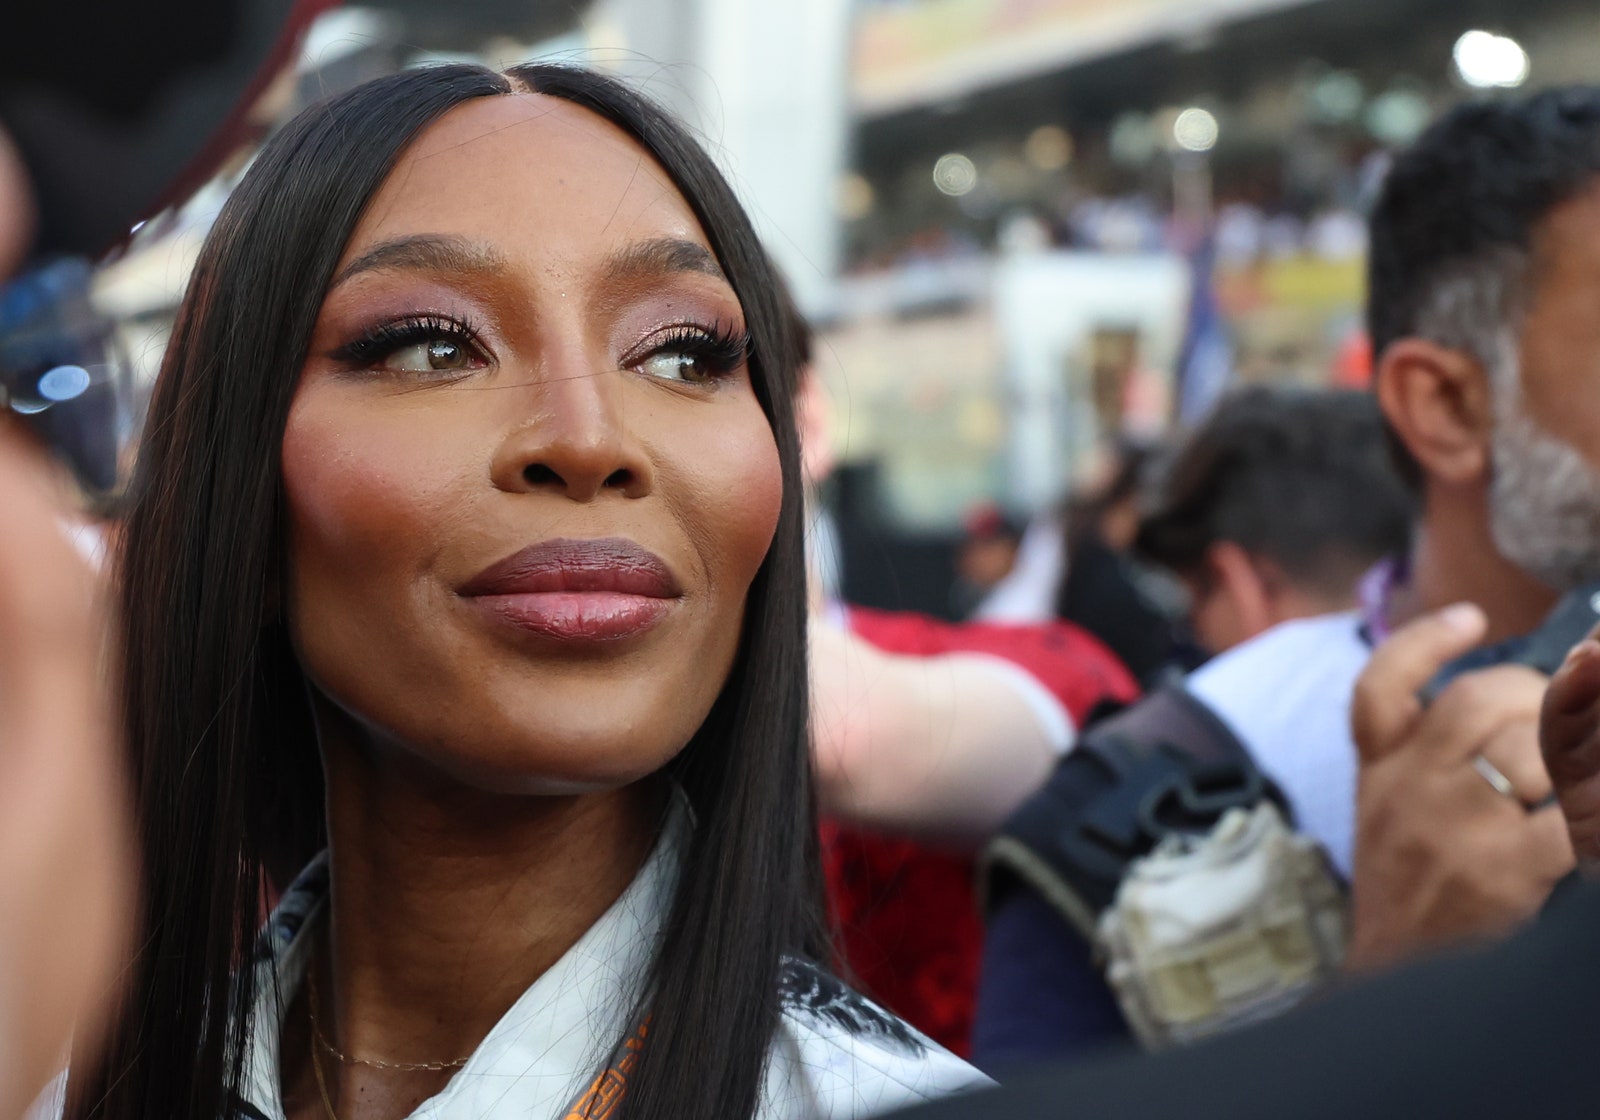 Naomi Campbell Sculpted Her Cheekbones With Blush—Heres How